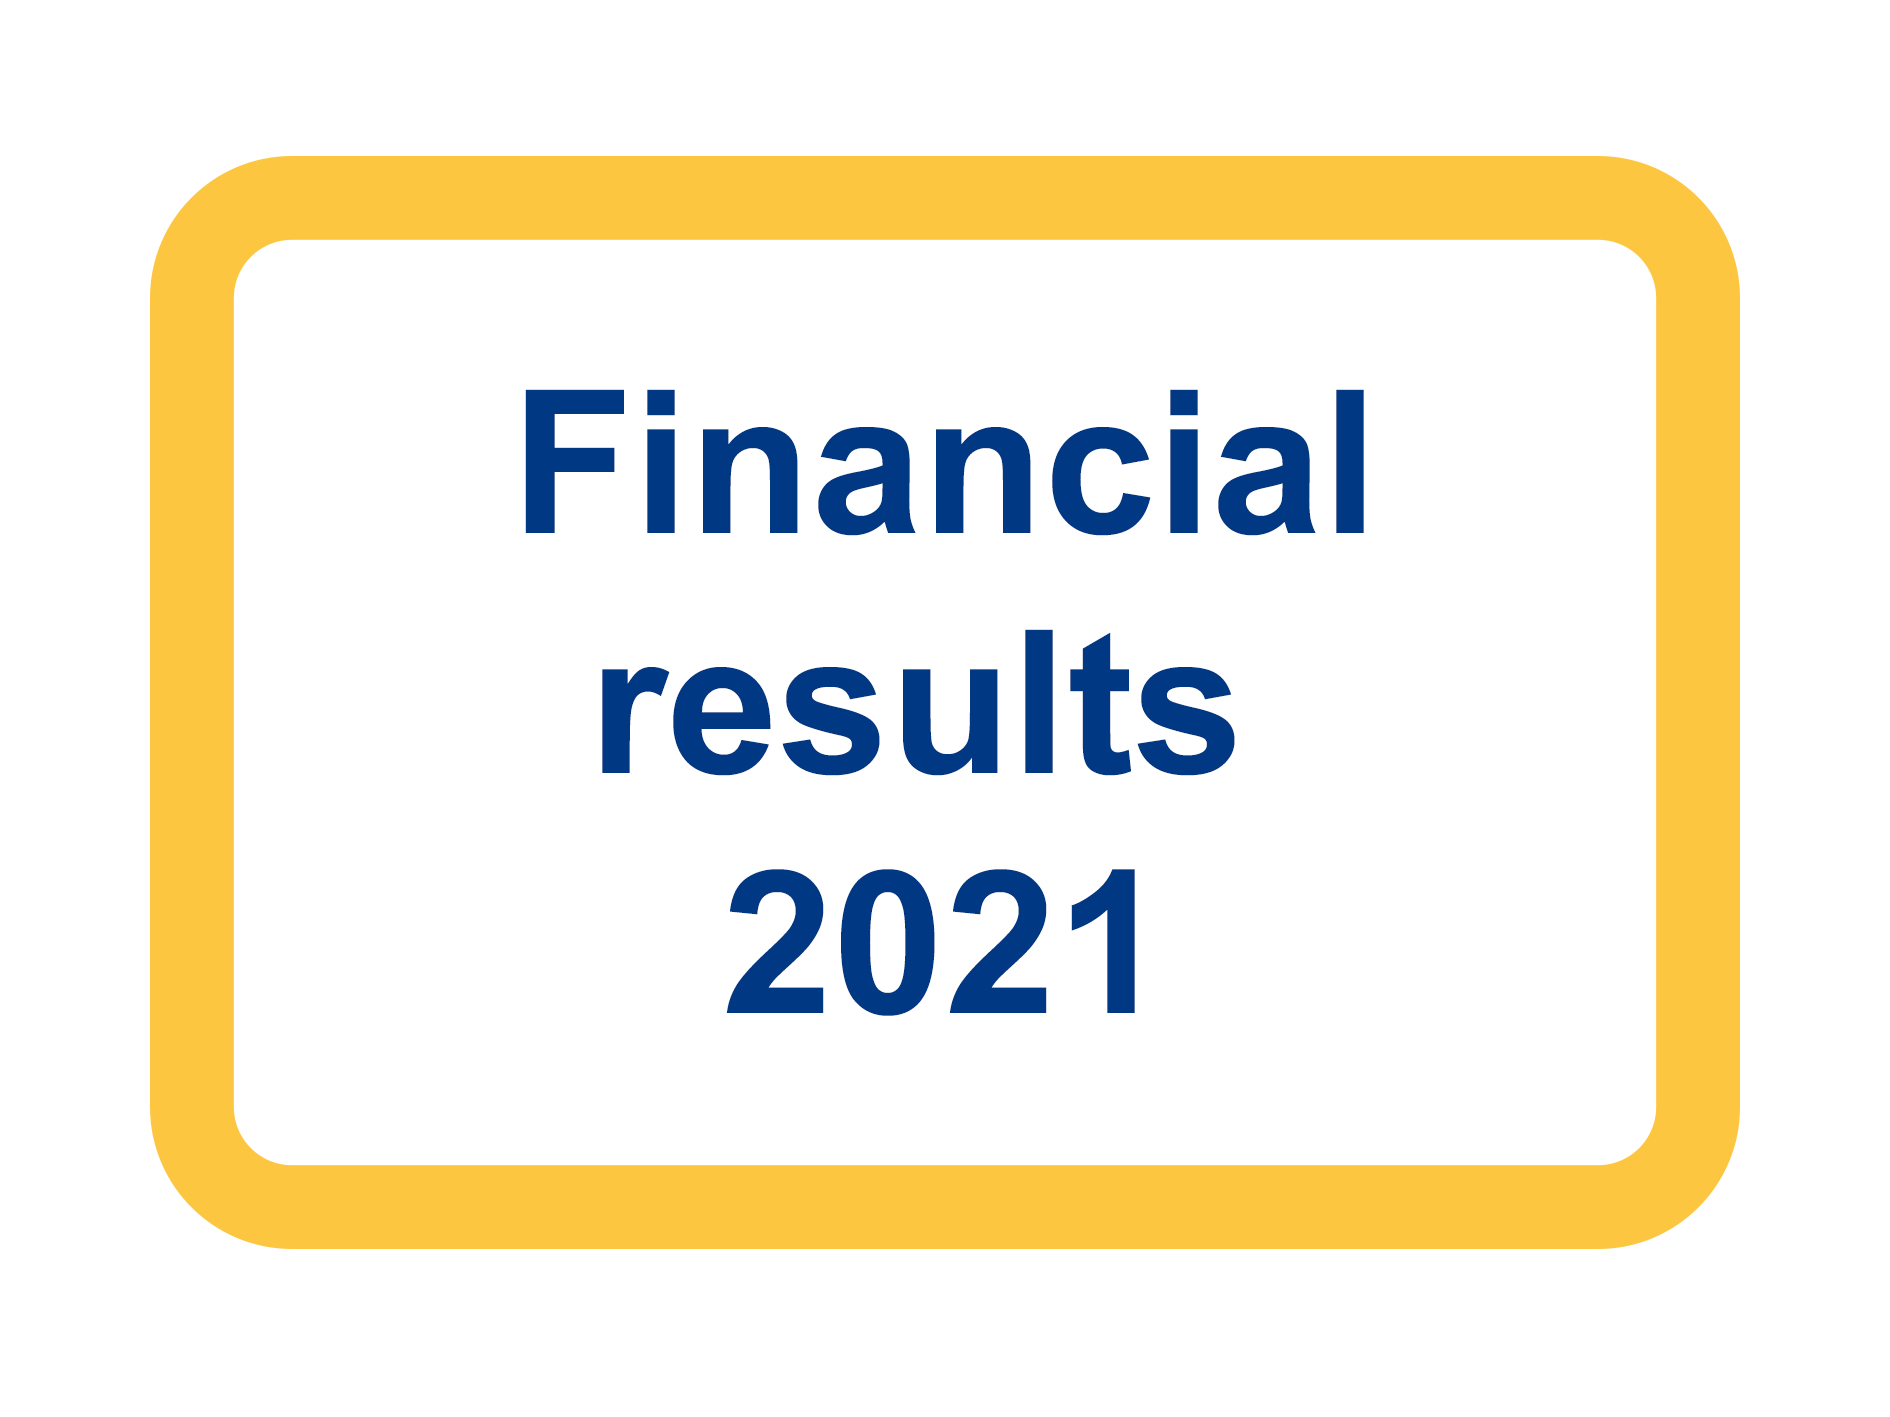 Financial results 2021